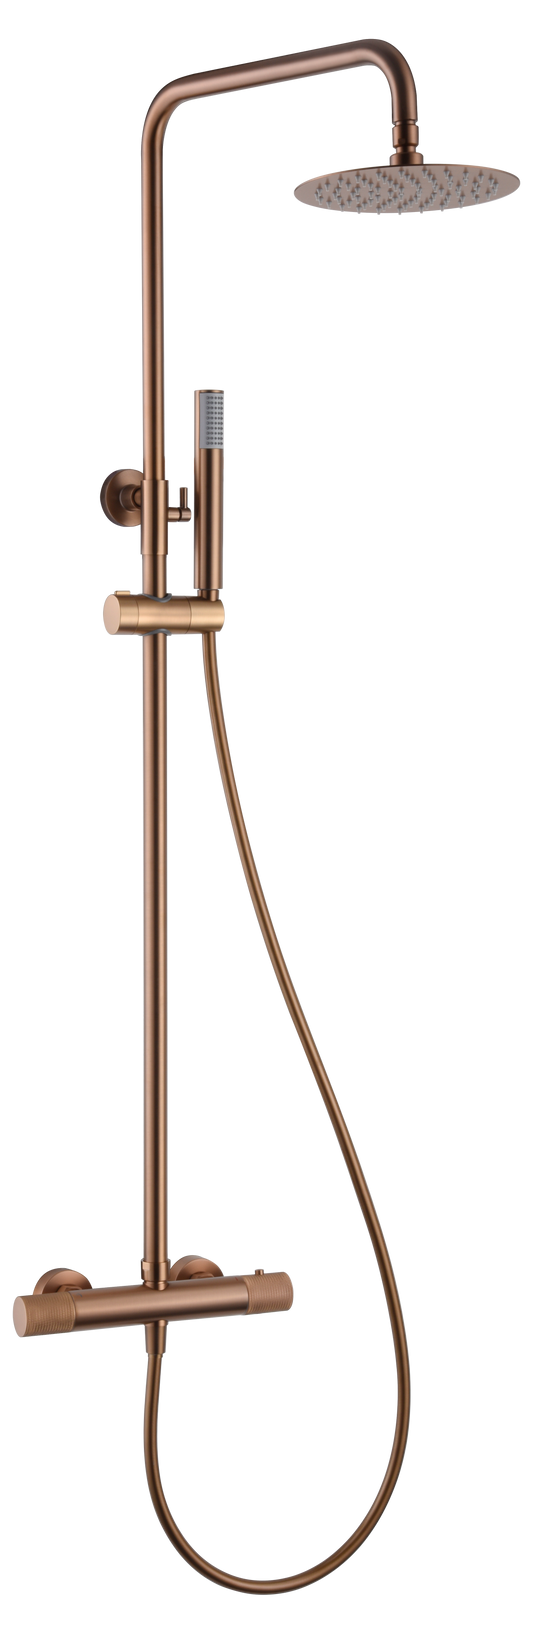 Imex Line brushed rose gold thermostatic shower bar taps 